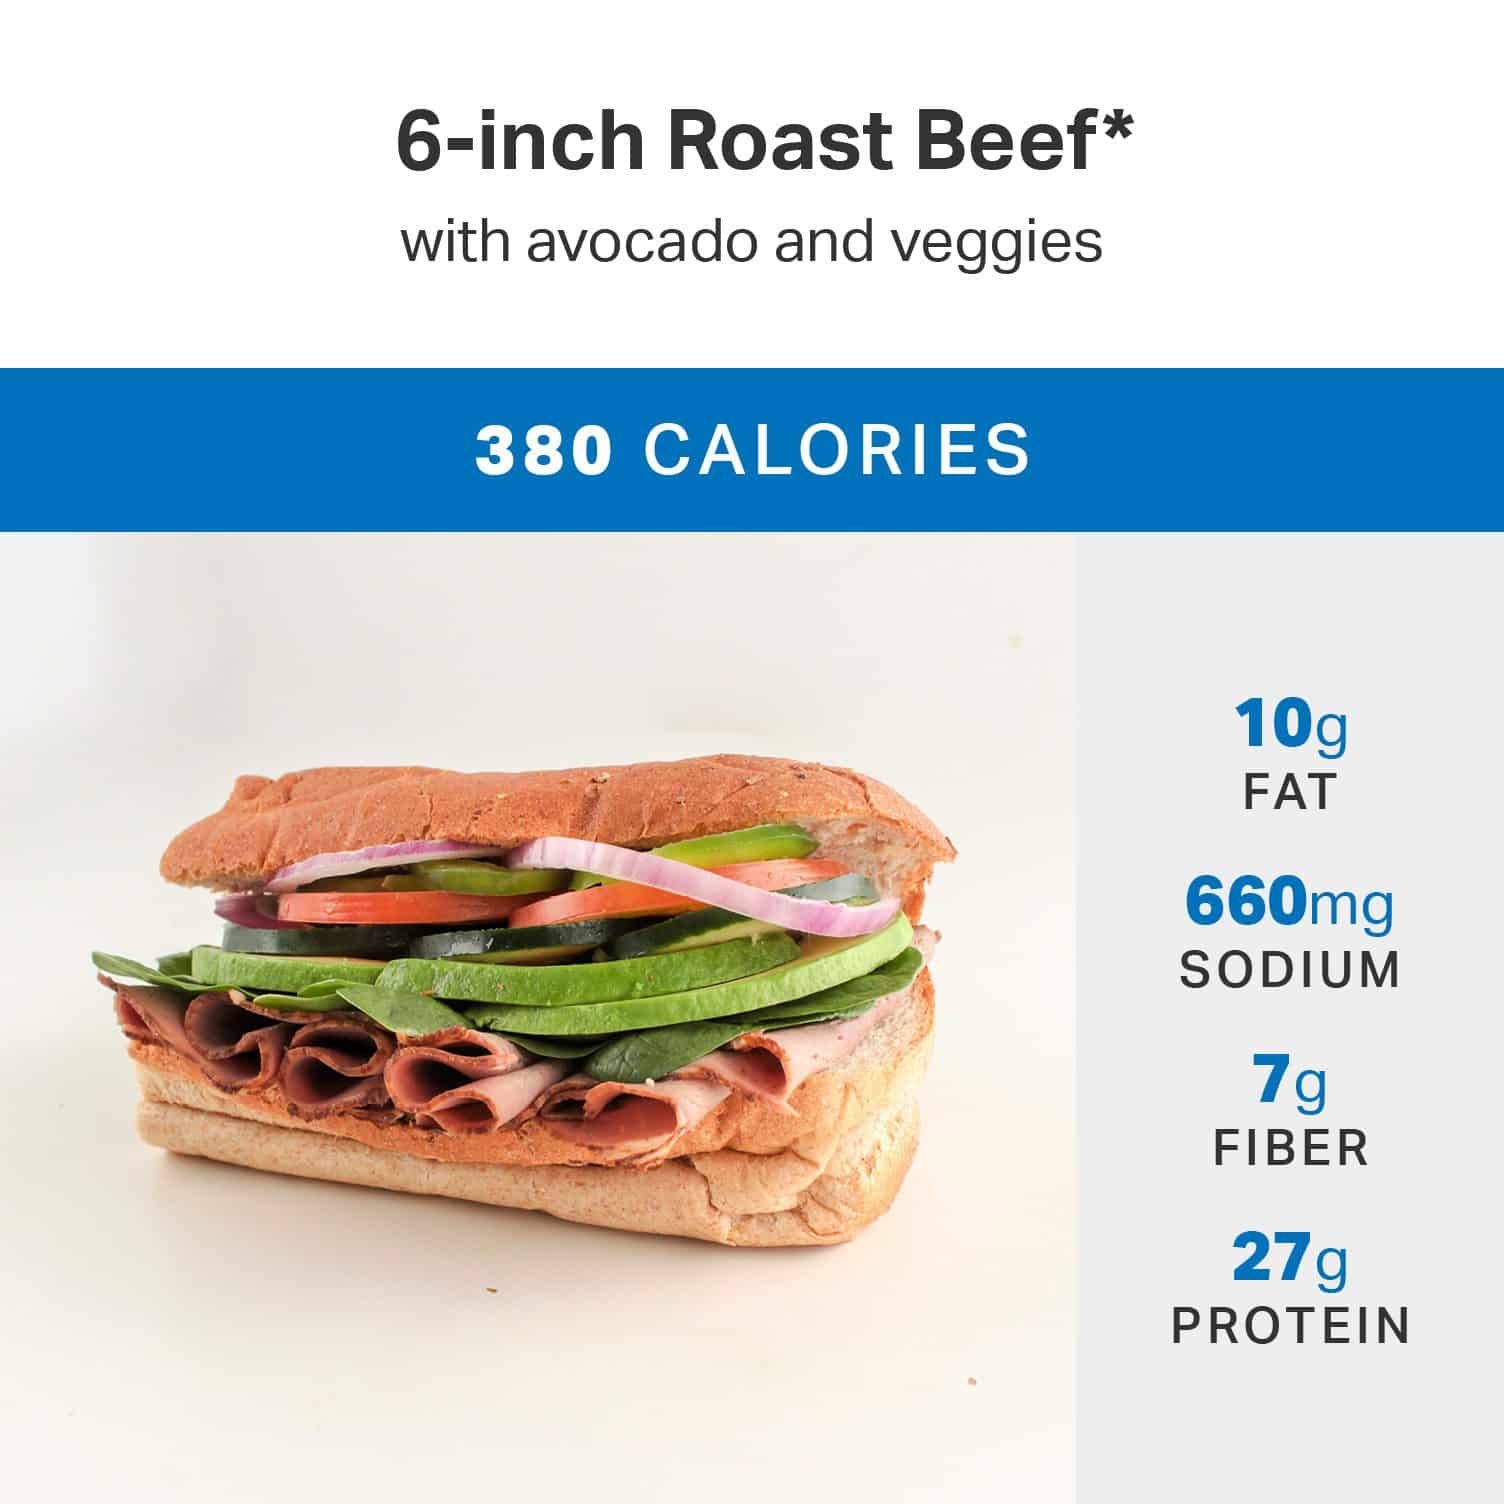 Why it made the cut: This sandwich has less than 400 calories while providi...